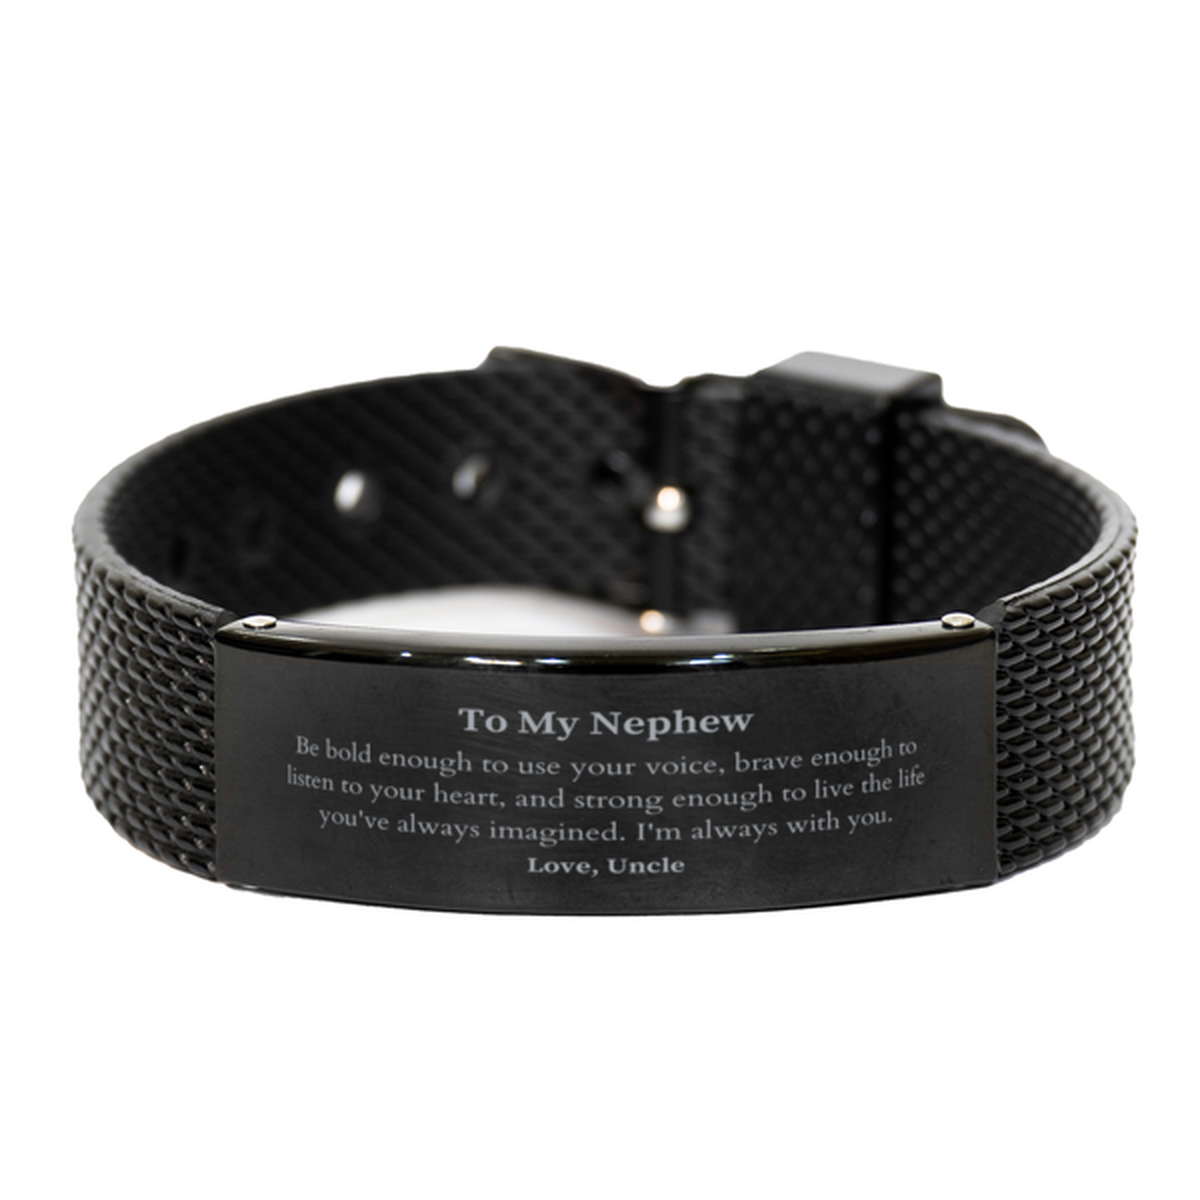 Keepsake Nephew Black Shark Mesh Bracelet Gift Idea Graduation Christmas Birthday Nephew from Uncle, Nephew Be bold enough to use your voice, brave enough to listen to your heart. Love, Uncle